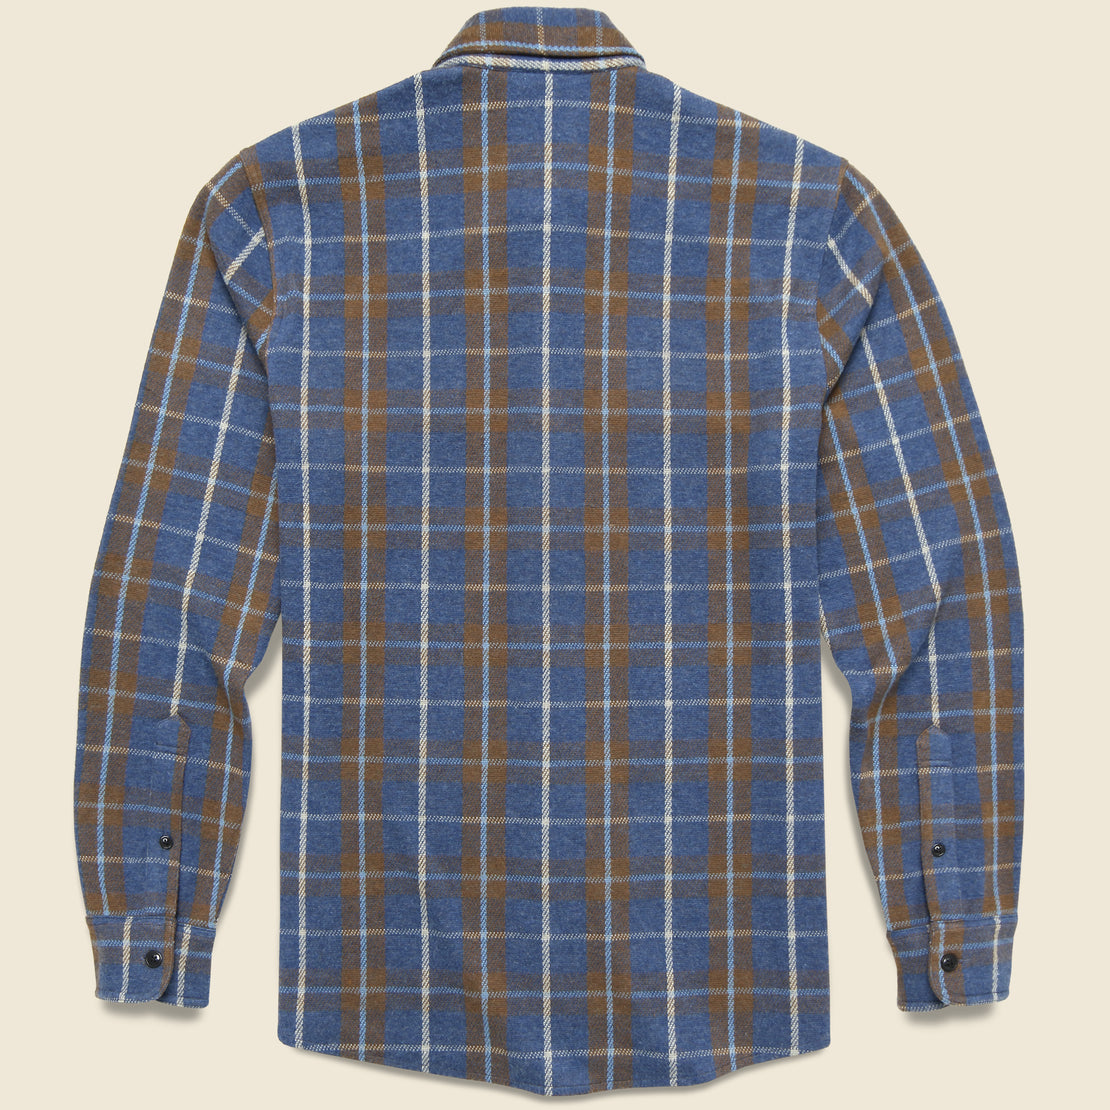 Legend Sweater Shirt - Alpine Lake Plaid - Faherty - STAG Provisions - Tops - L/S Woven - Plaid